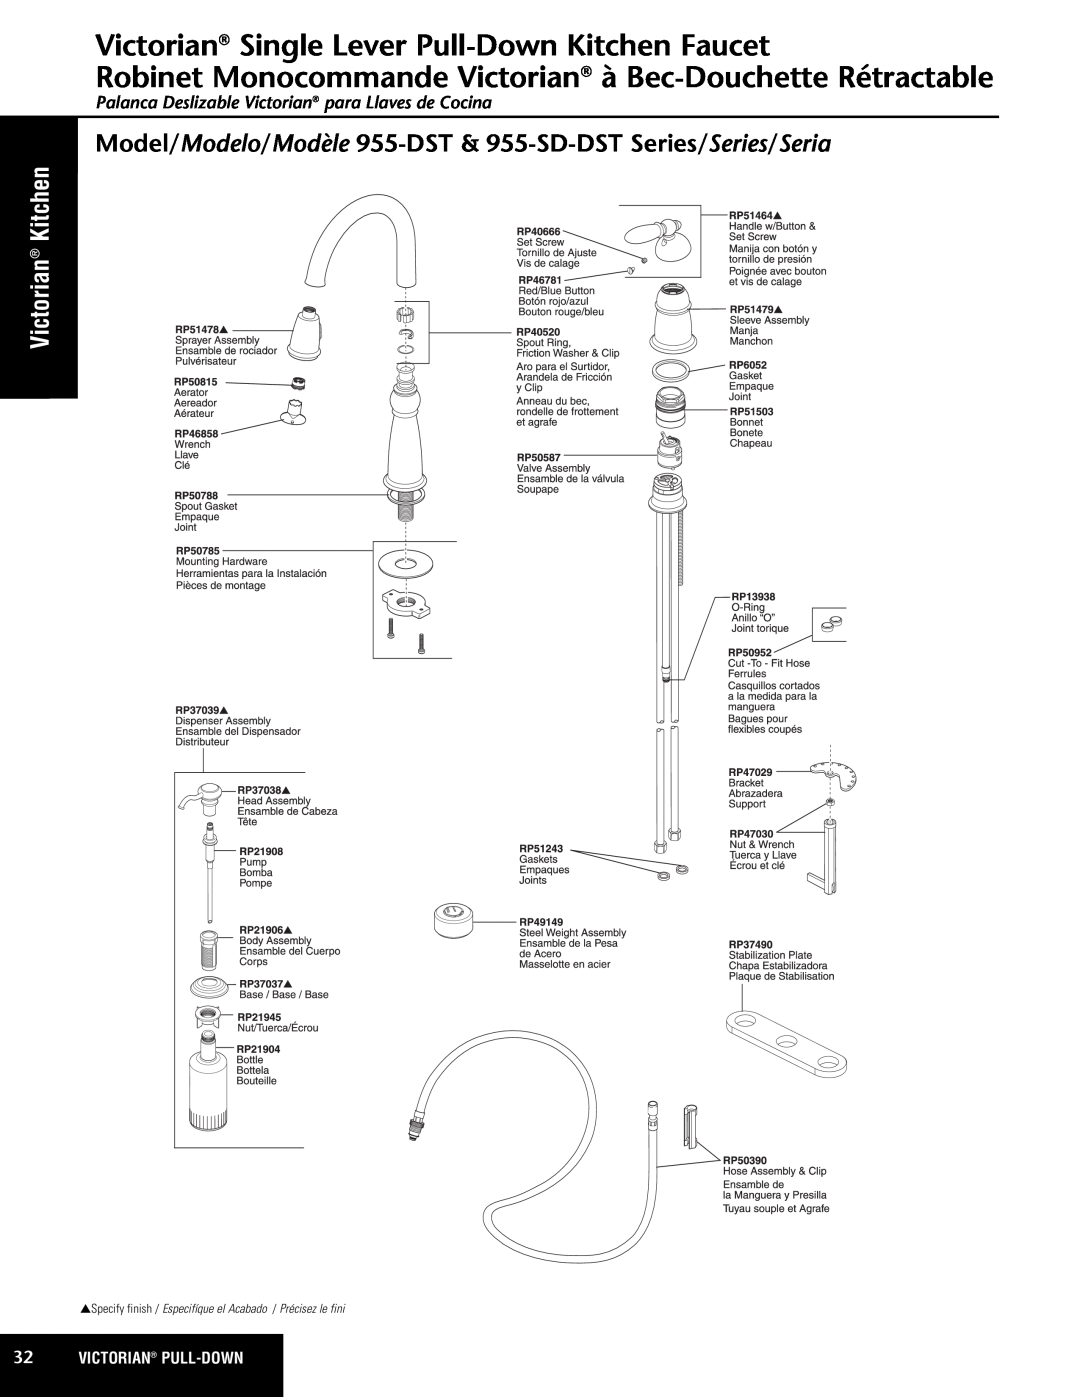 Delta 955-DST Series manual Victorian Single Lever Pull-Down Kitchen Faucet, Victorian Kitchen, Victorian Pull-Down 